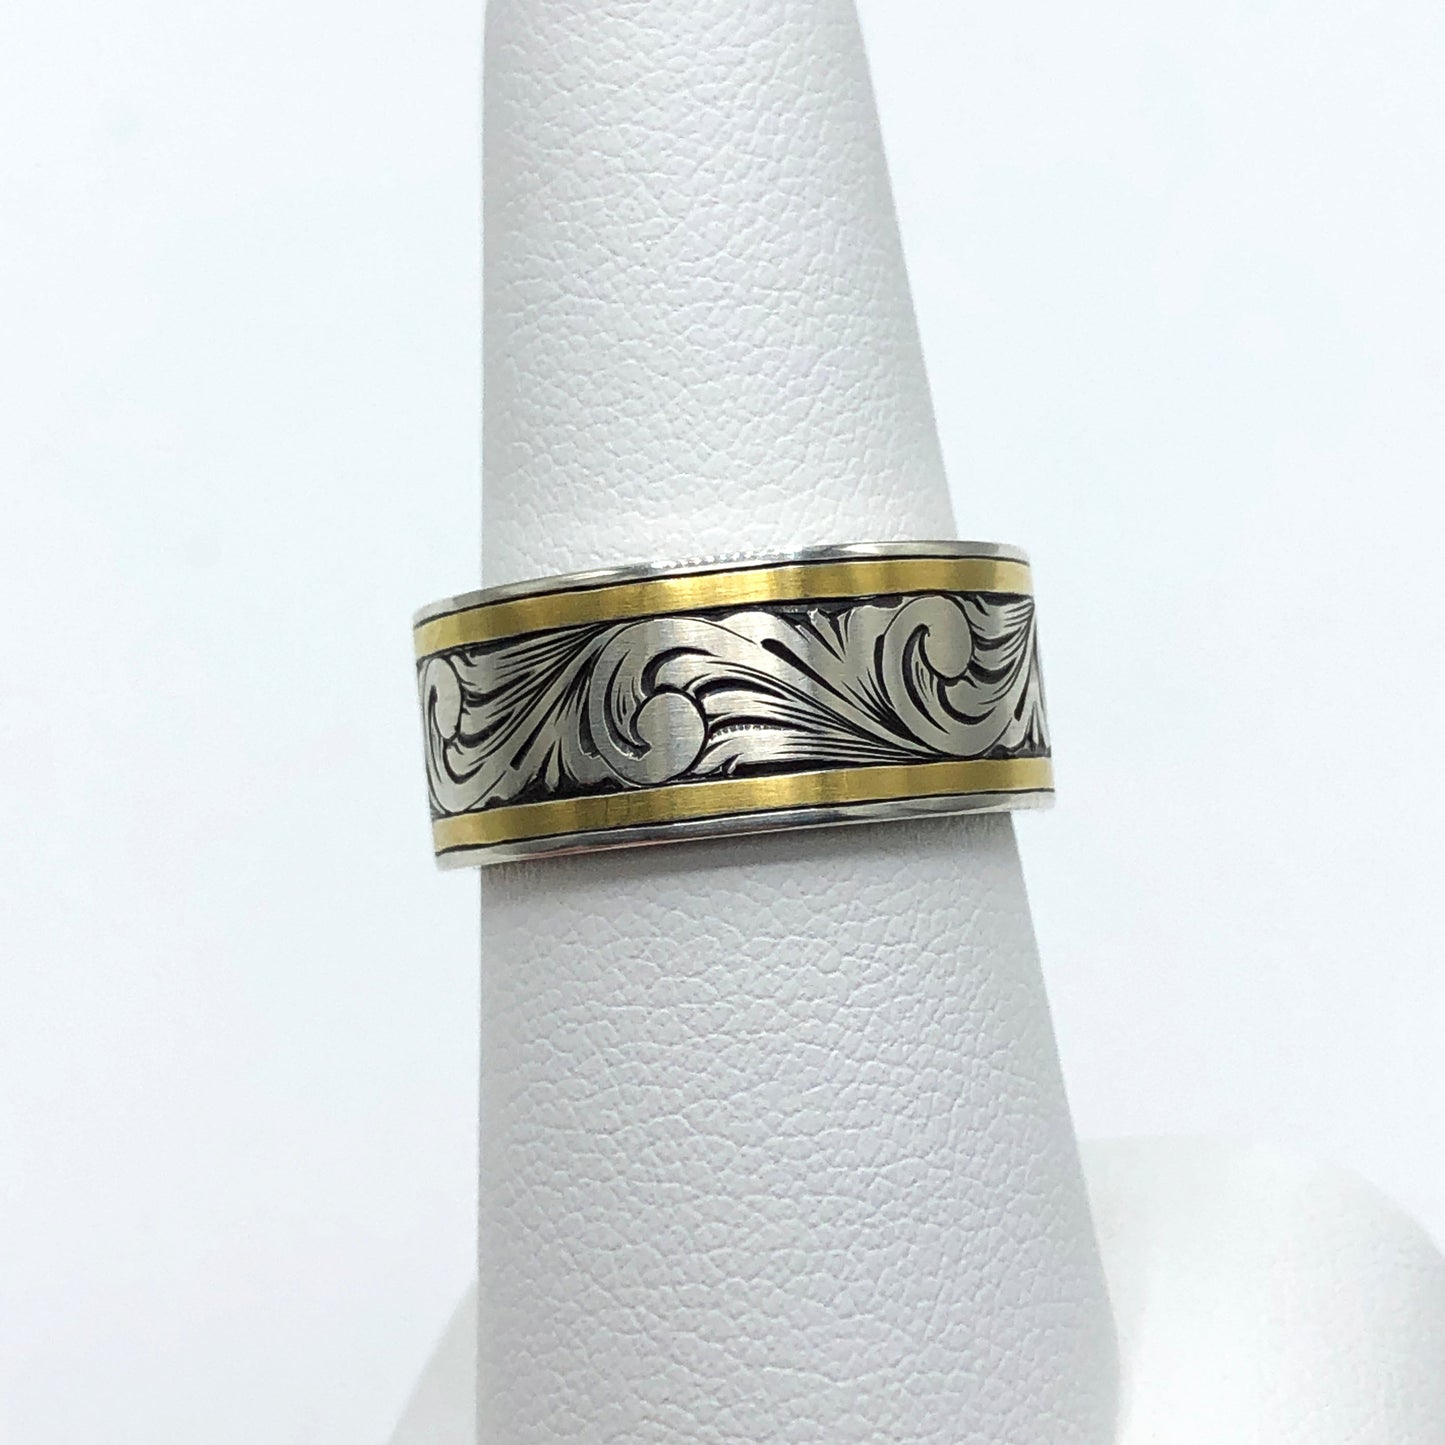 Classic Scroll Hand Engraved Ring with Gold Inlay - Size 8